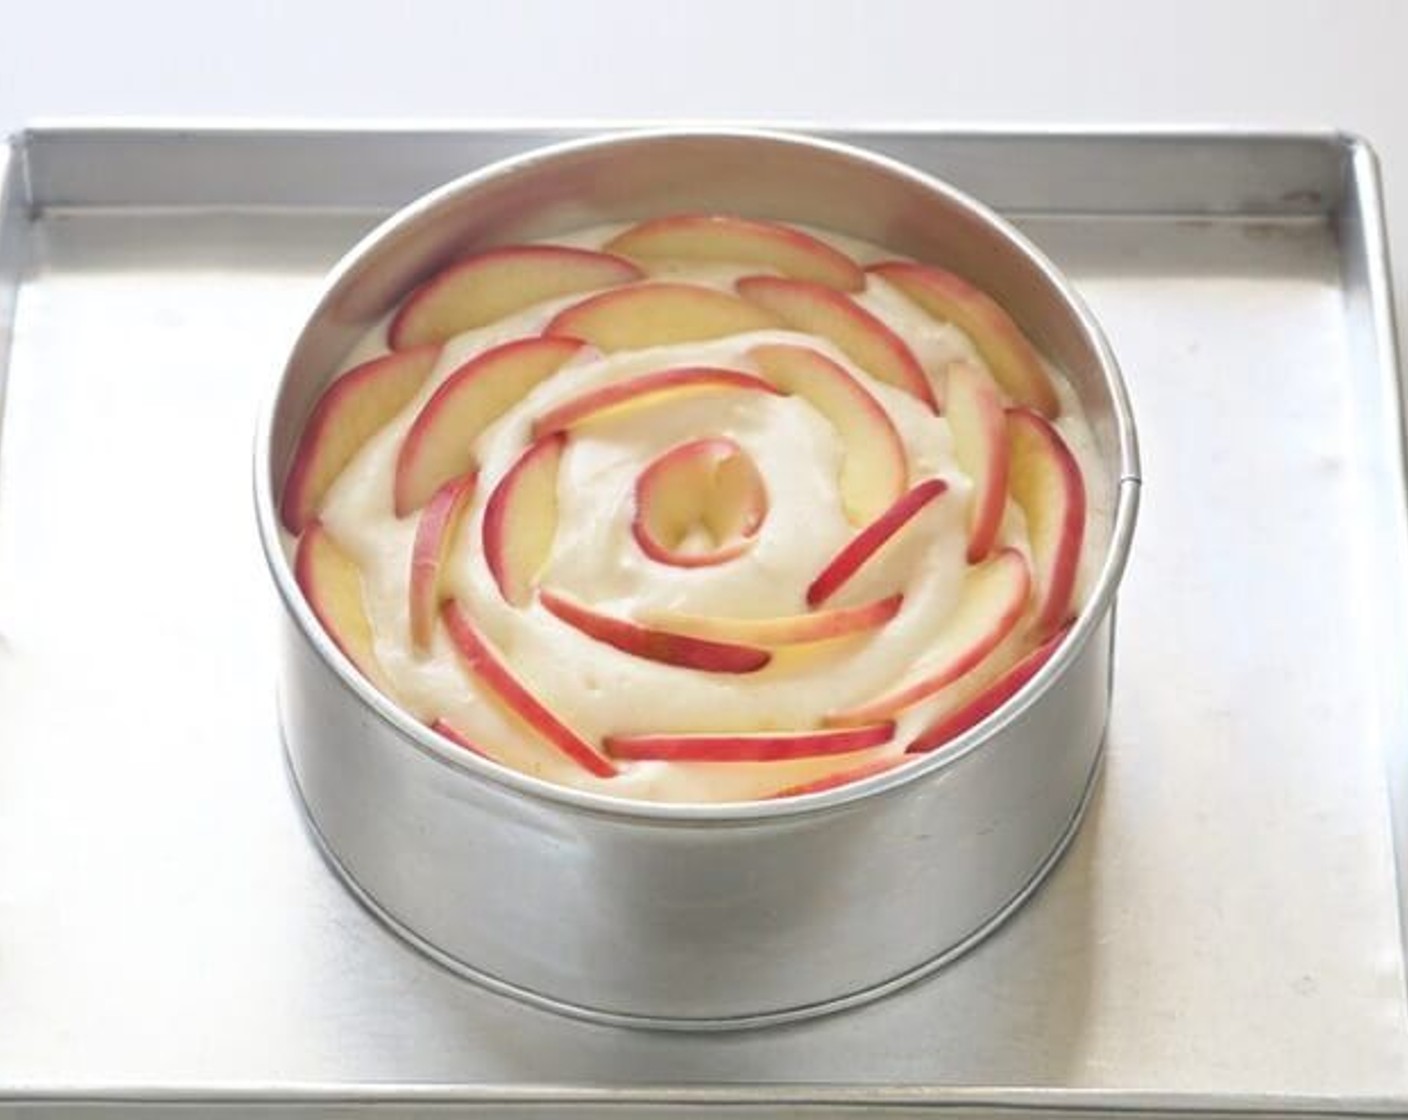 step 10 Pour batter into a 7 inch removable cake pan. Gently arrange sliced apples on top of the batter into a rose form.